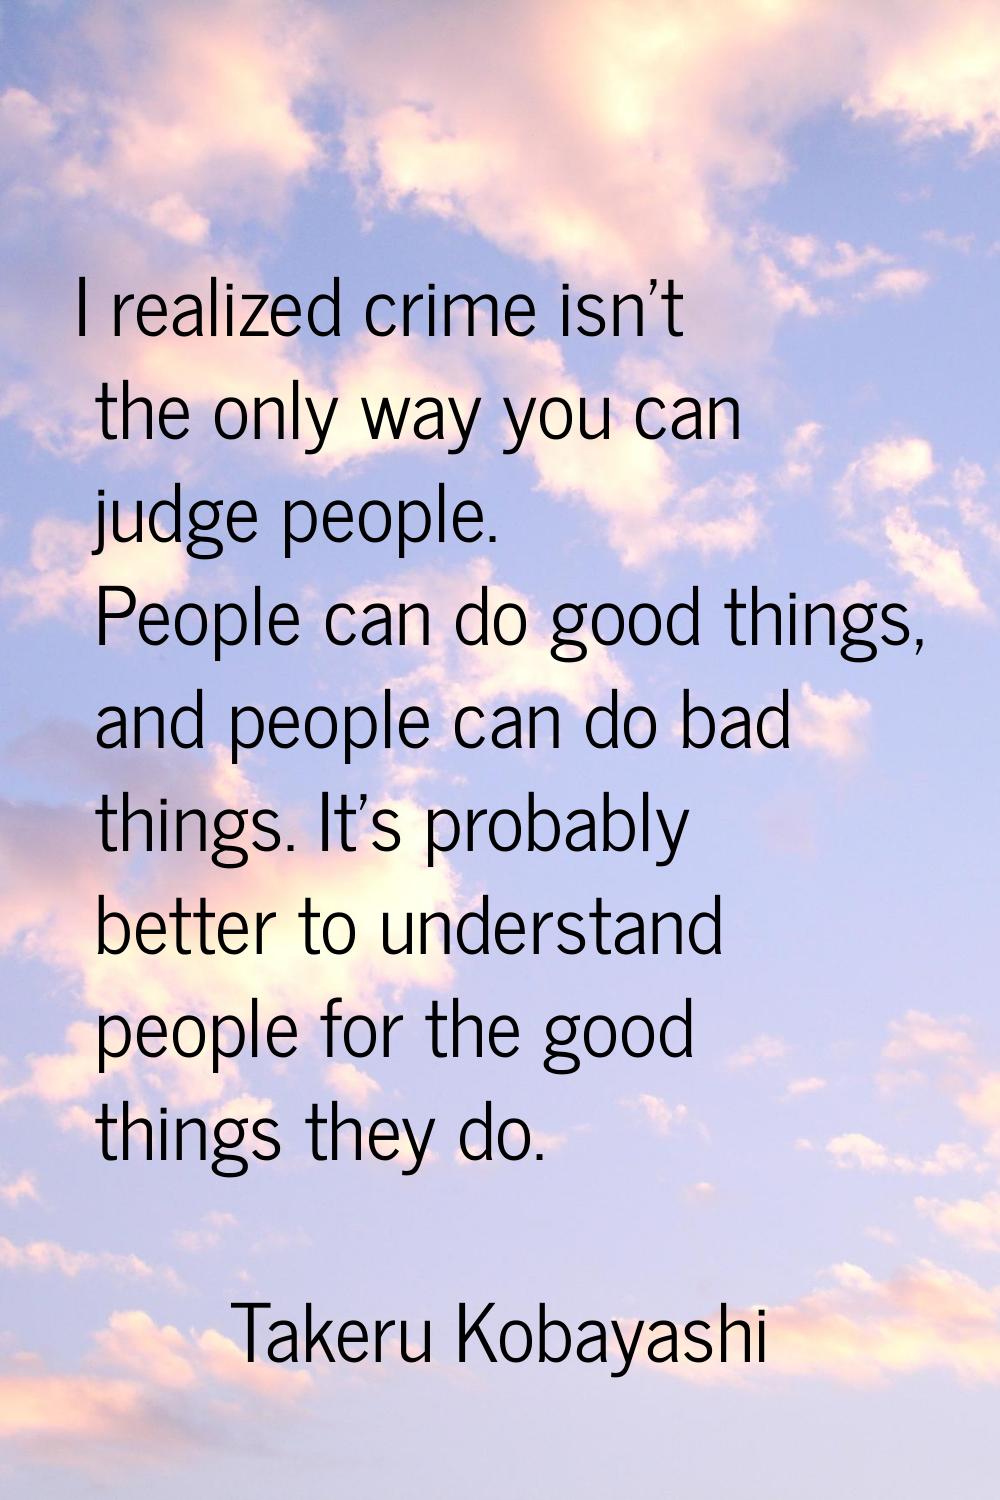 I realized crime isn't the only way you can judge people. People can do good things, and people can